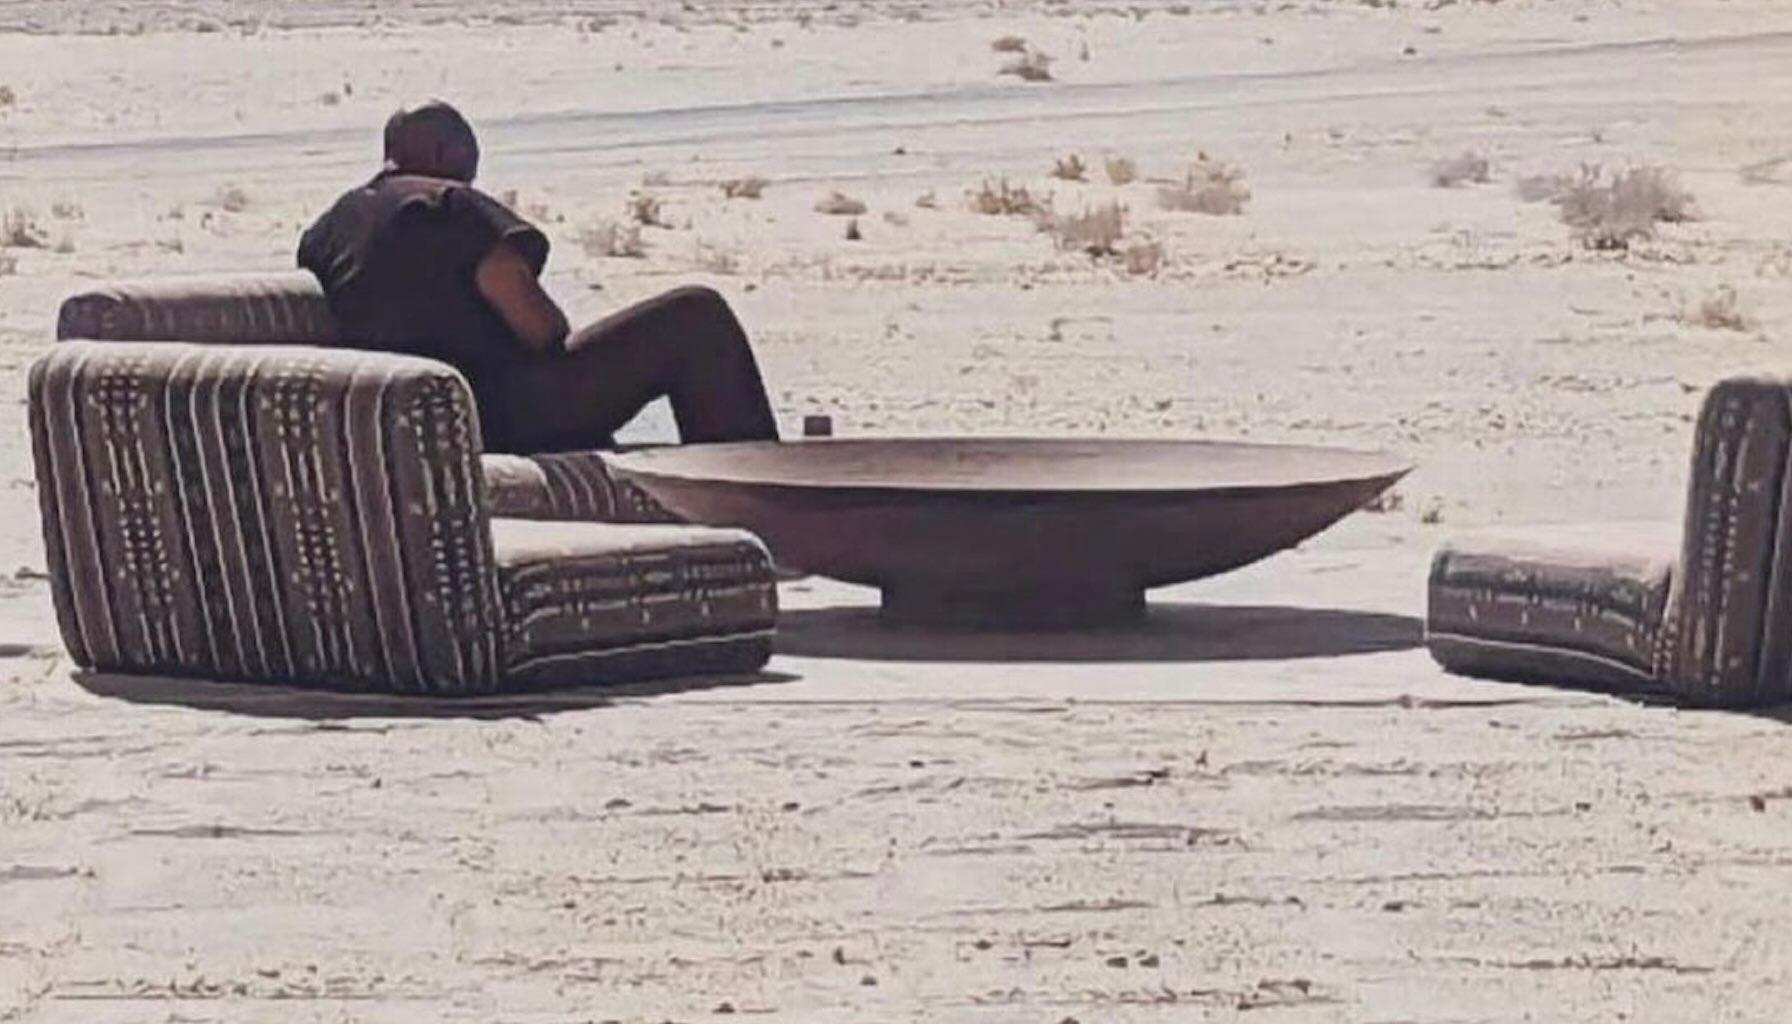 Is Kanye West recording his new album in AlUla?